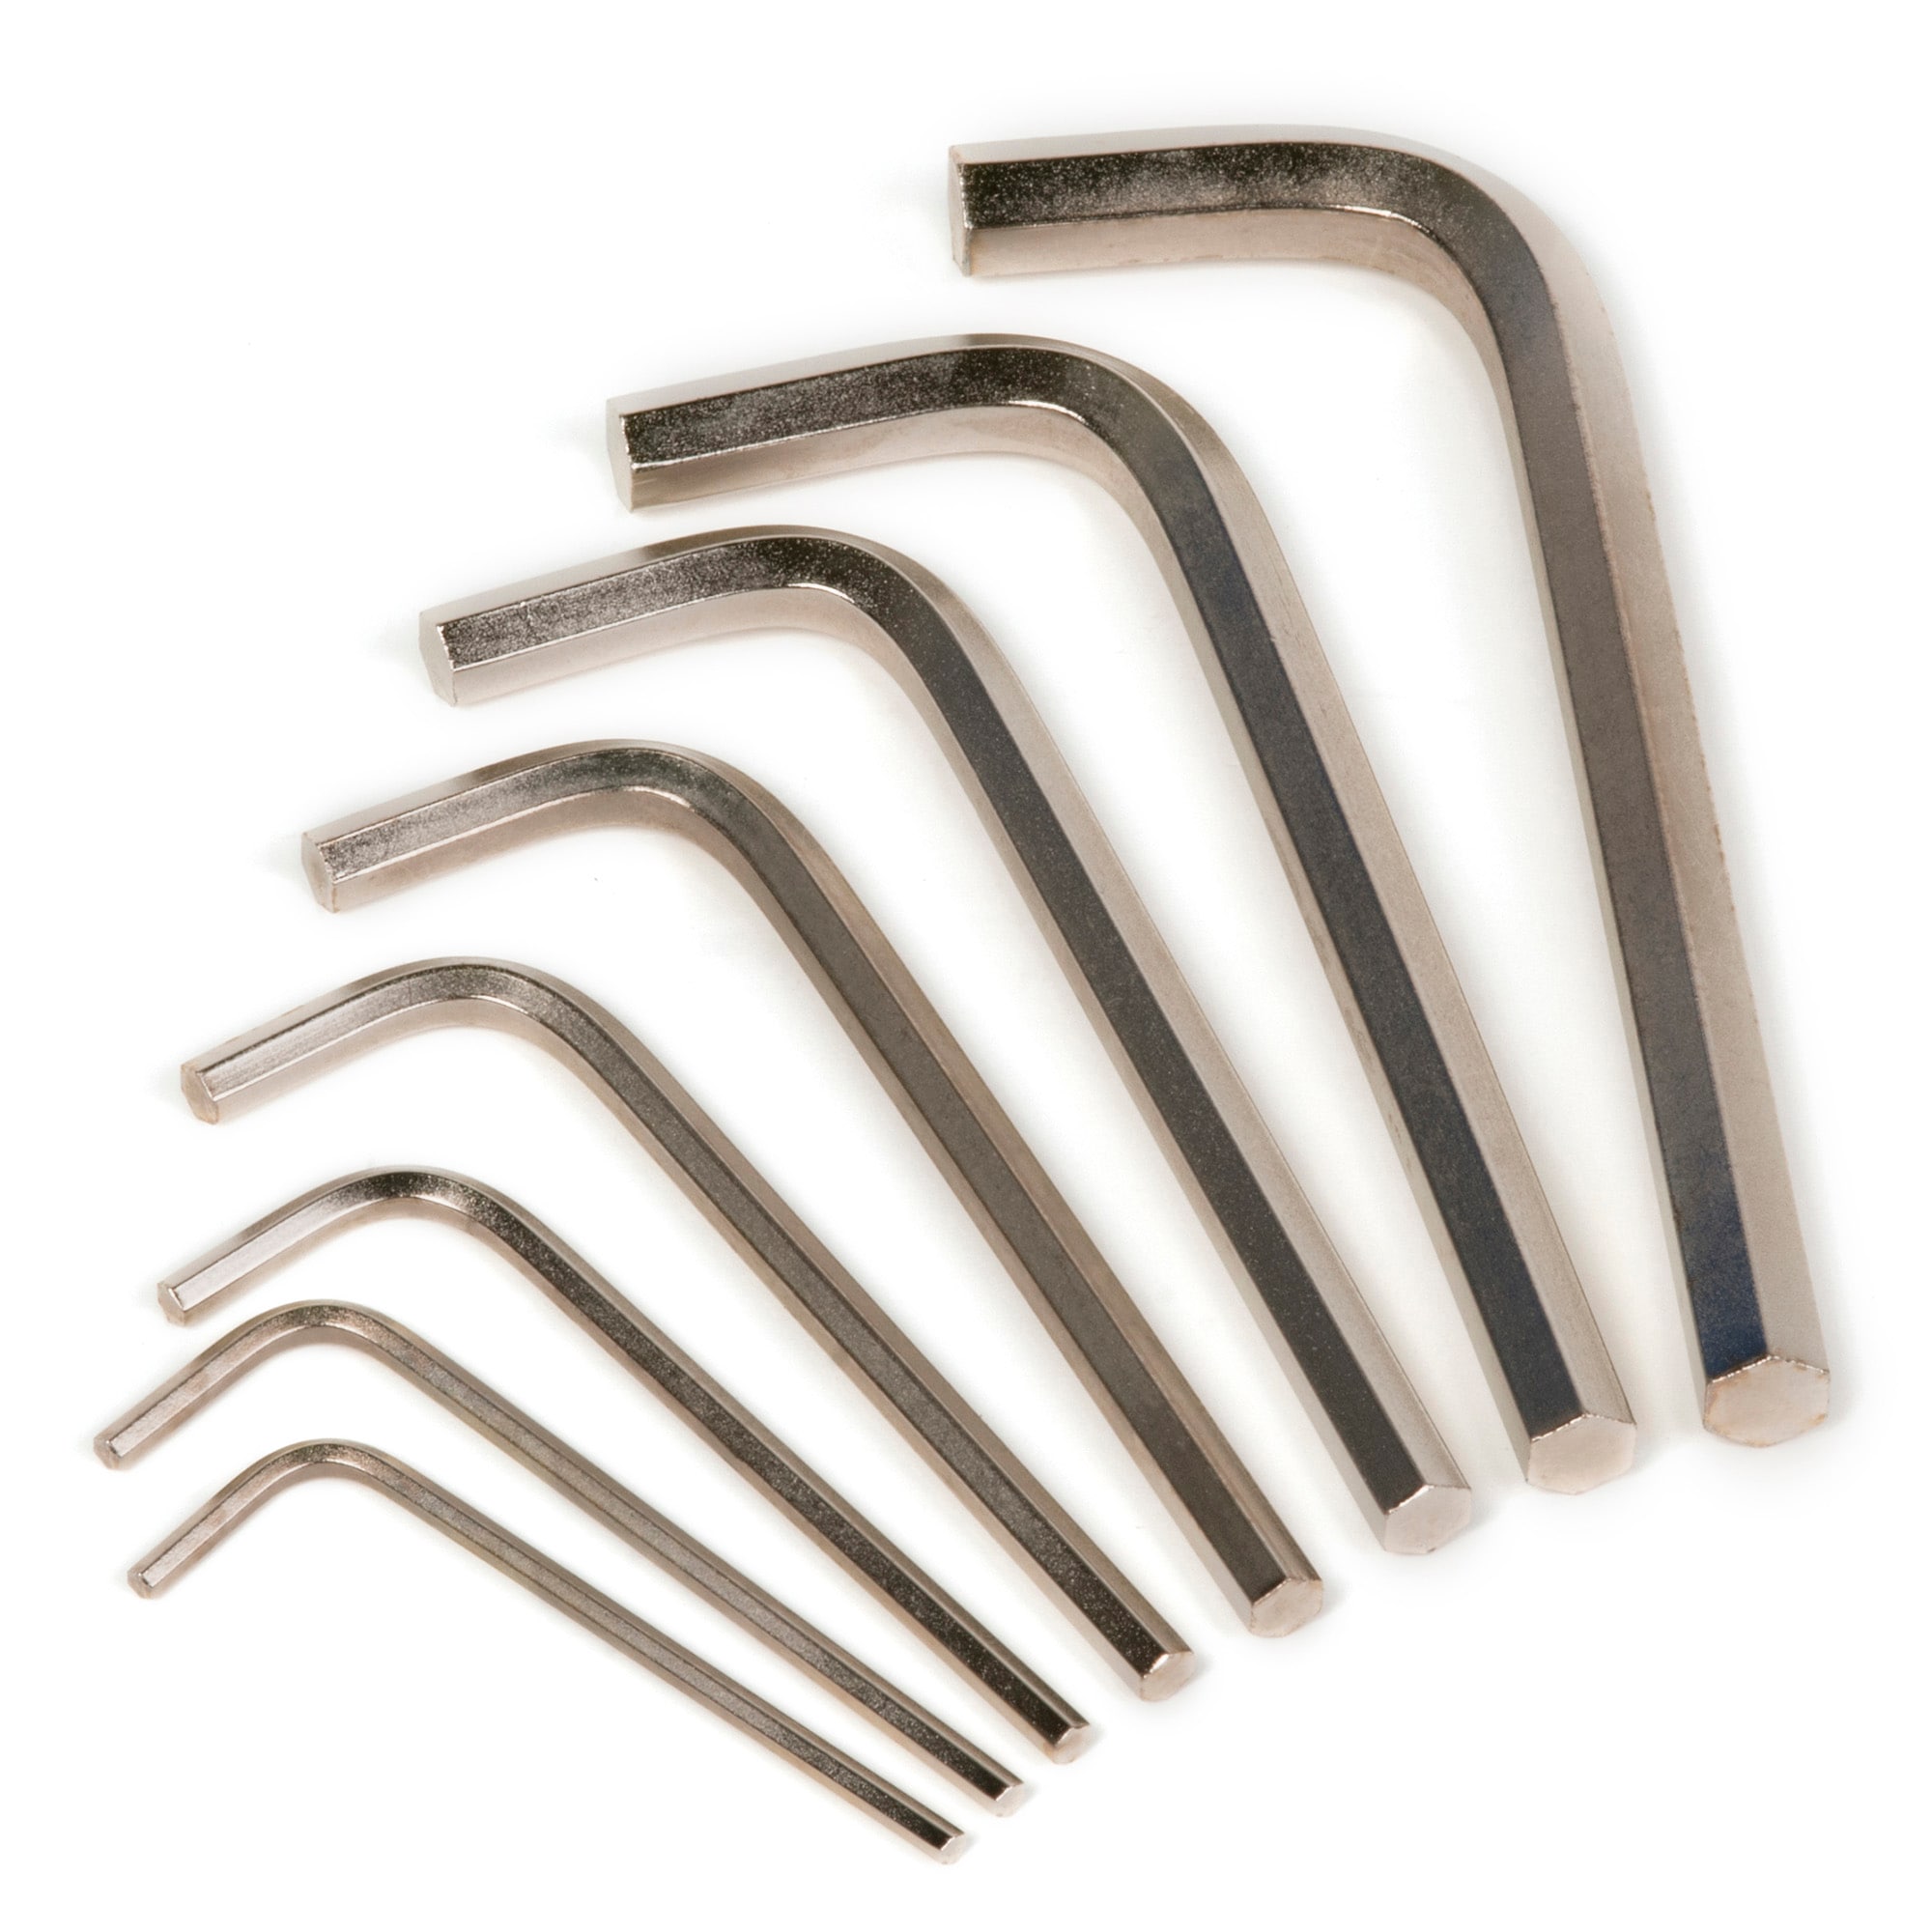 2.5mm Hex Key Allen Wrench - Stainless Stair Parts – Stainless